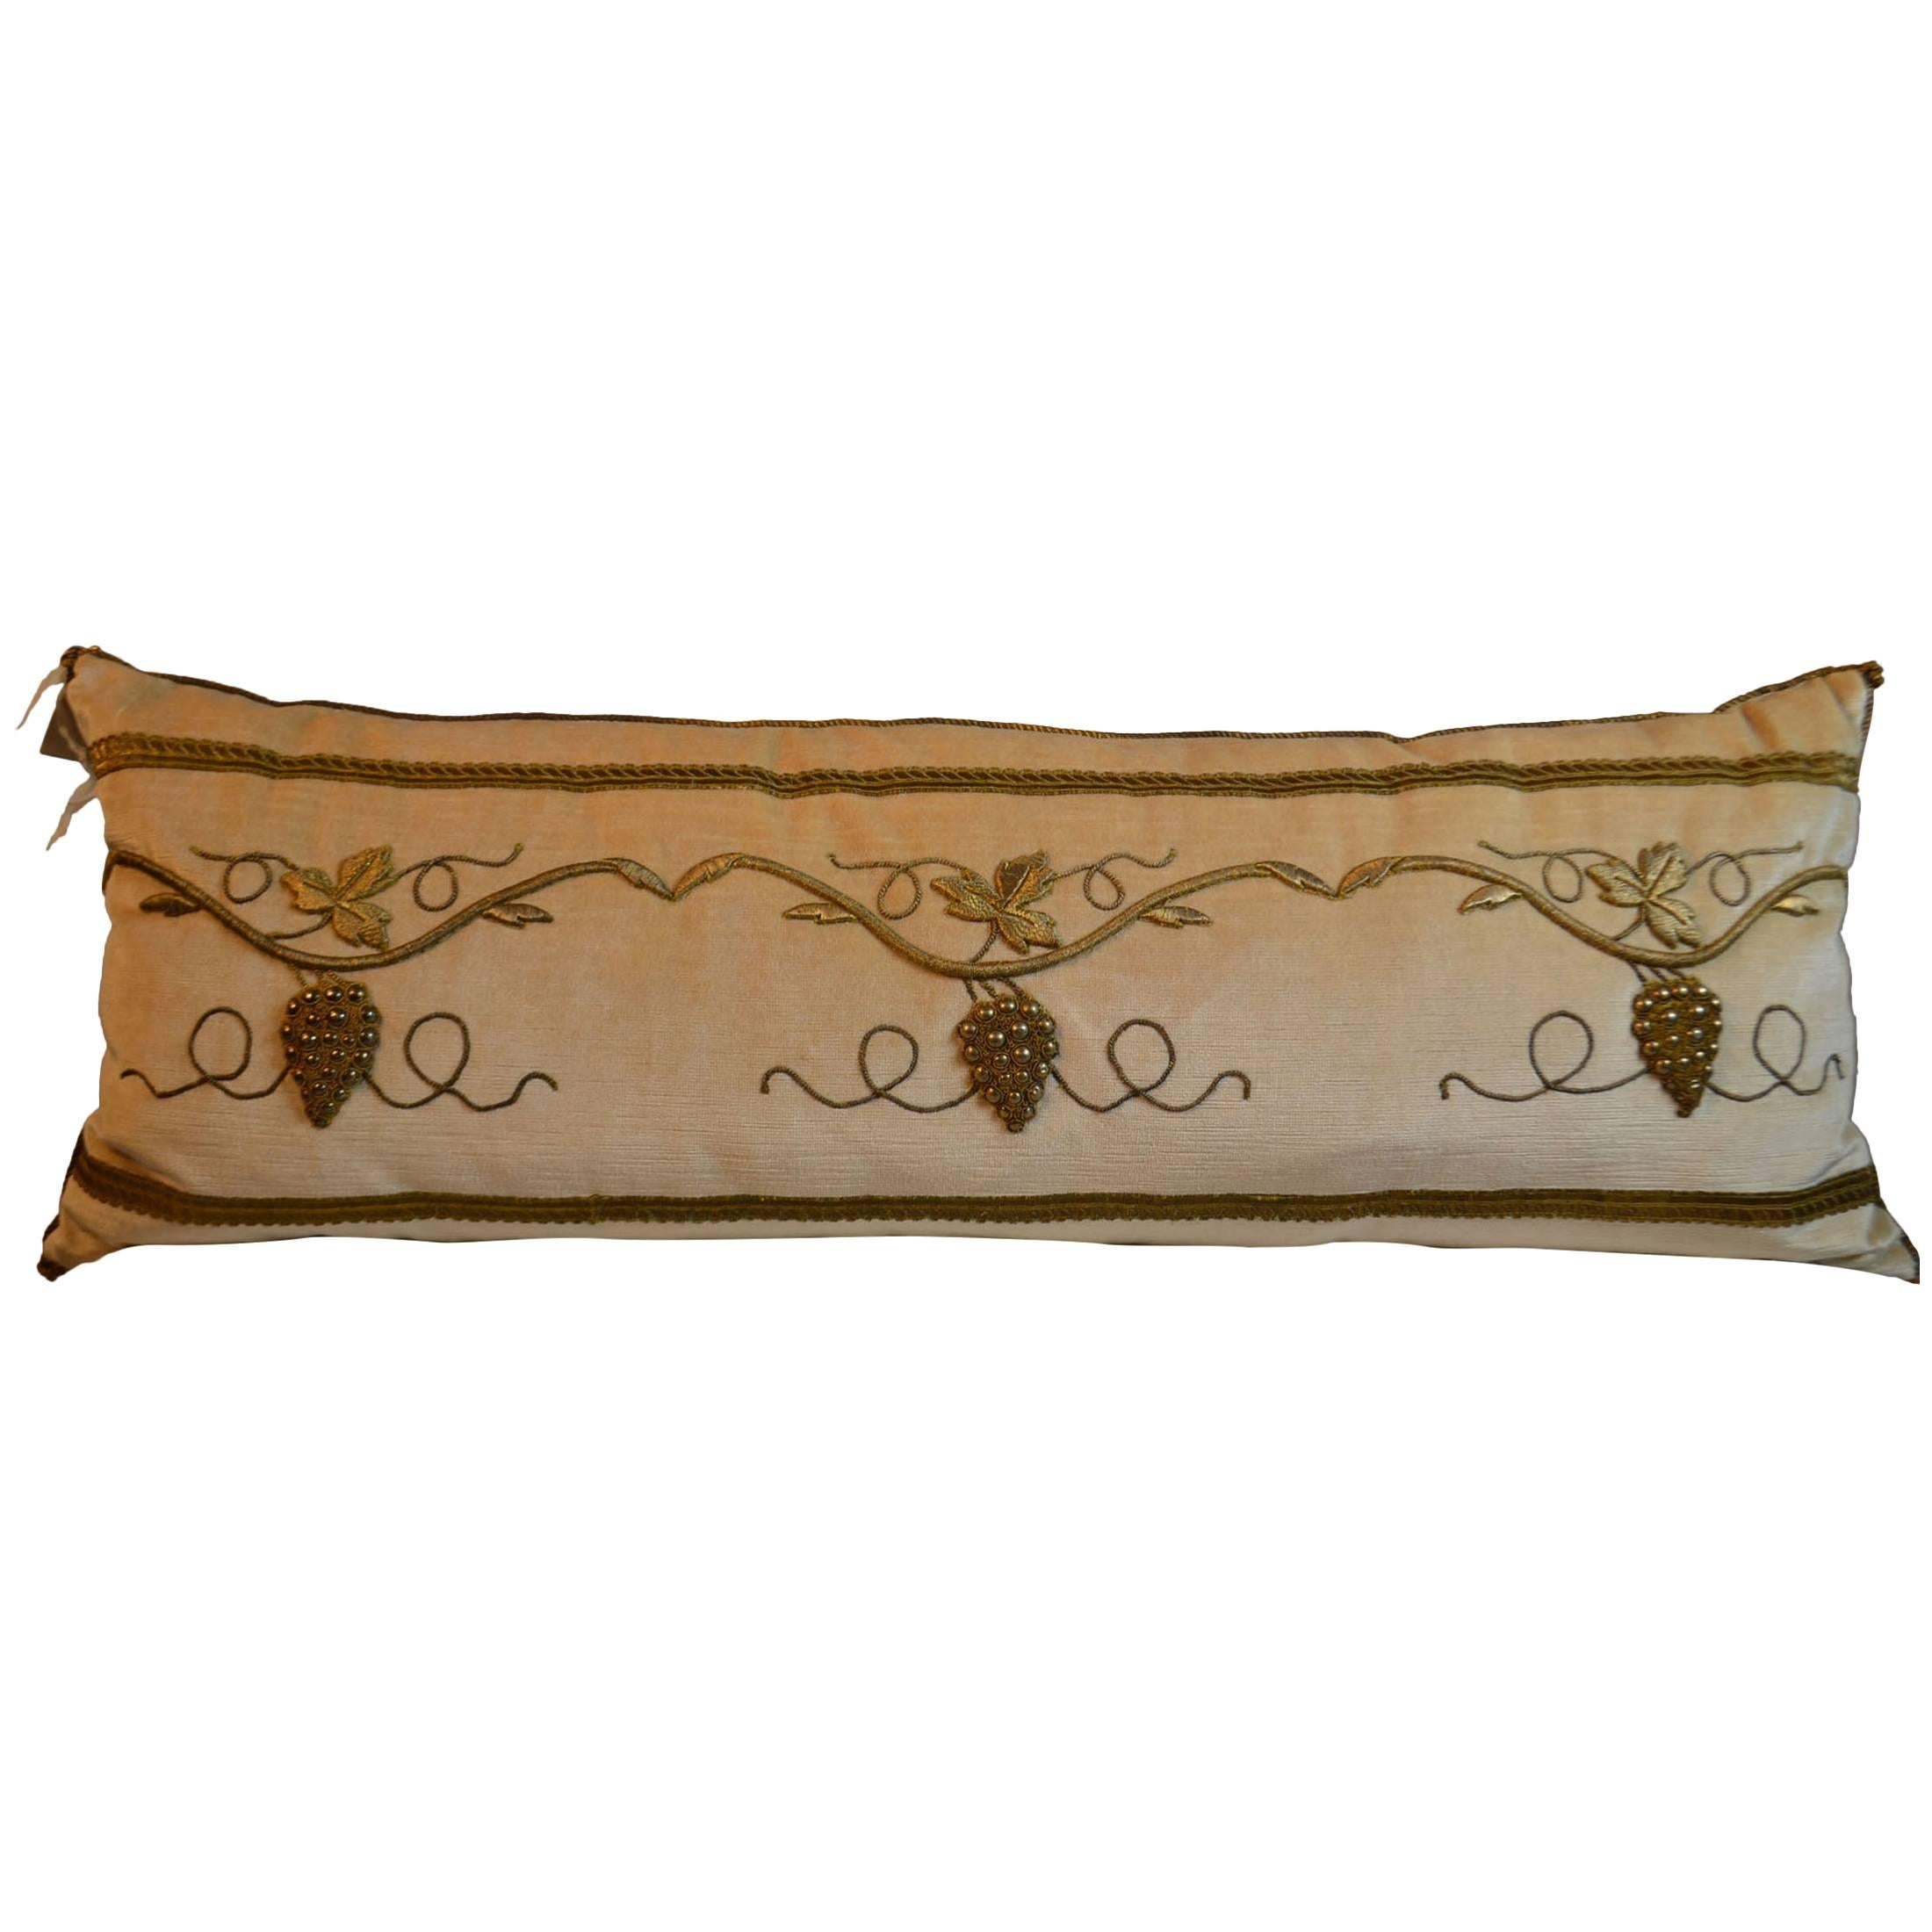 Pillow with Antique Raised Gold Metallic Embroidery